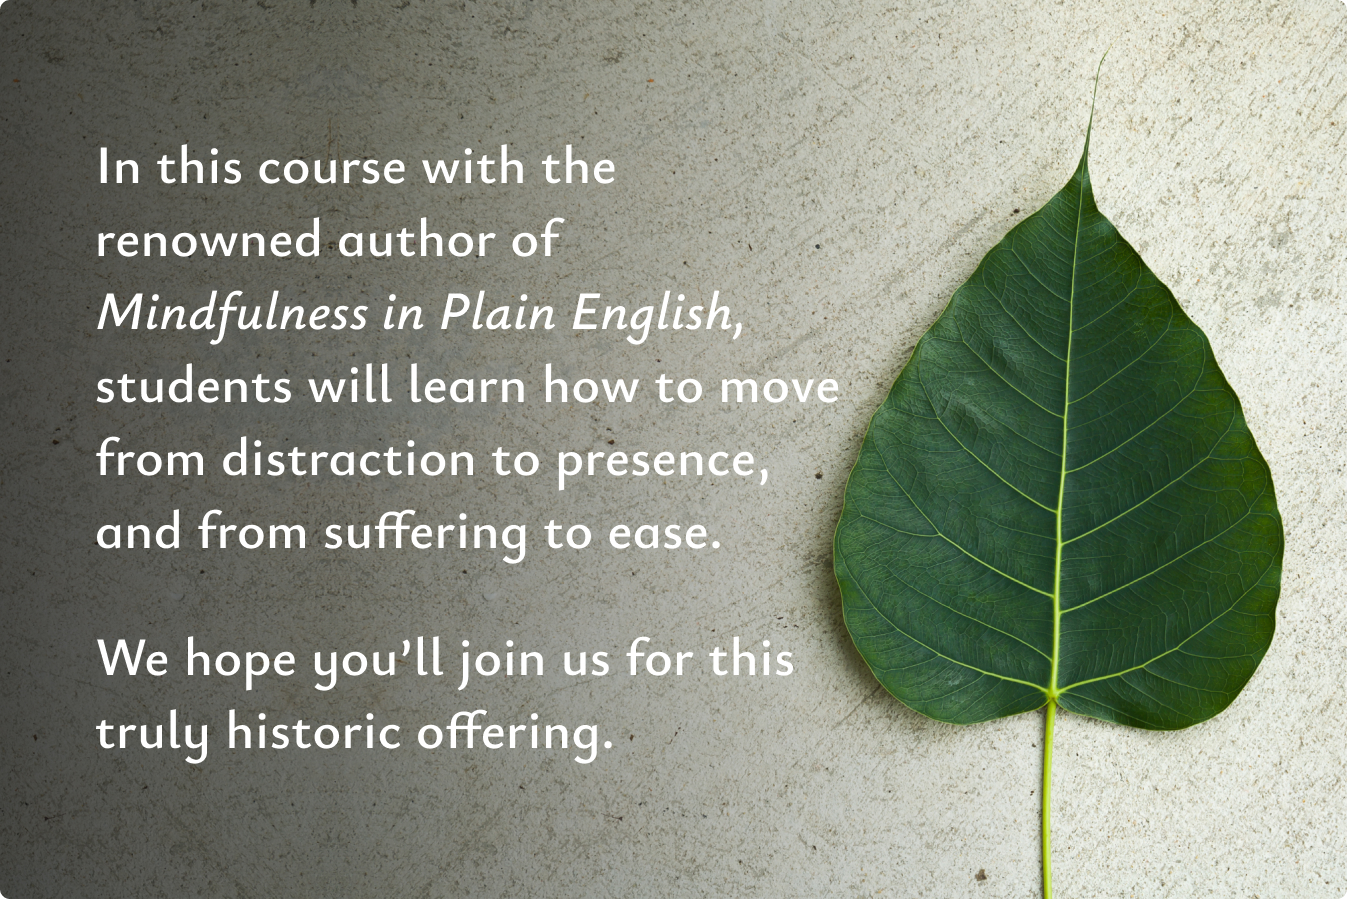 Mindfulness in Plain English - The Wisdom Experience